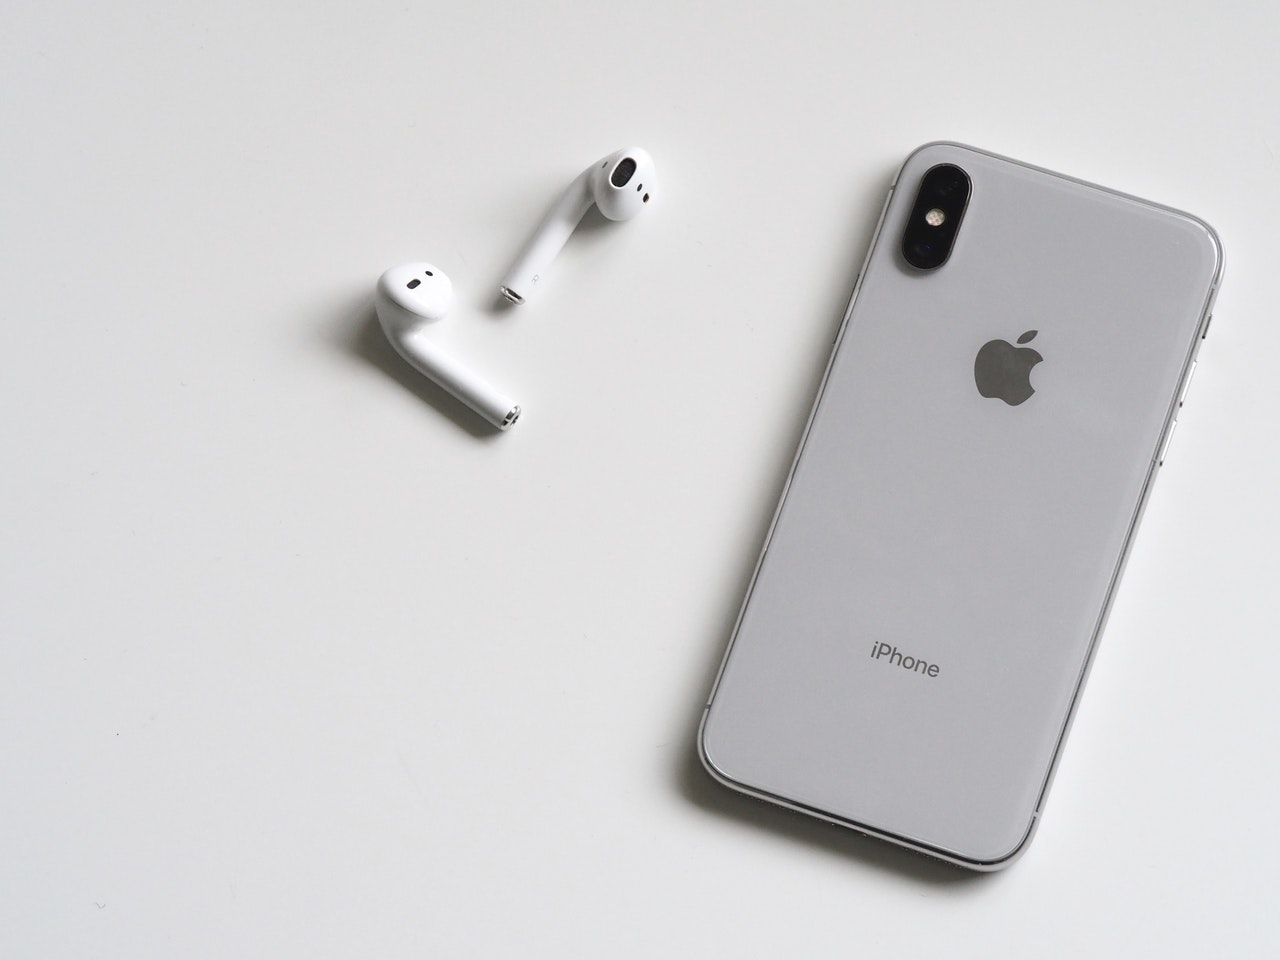 A Pair of Apple's AirPods pictured next to an iPhone | Photo by Plush Design Studio from Pexels.